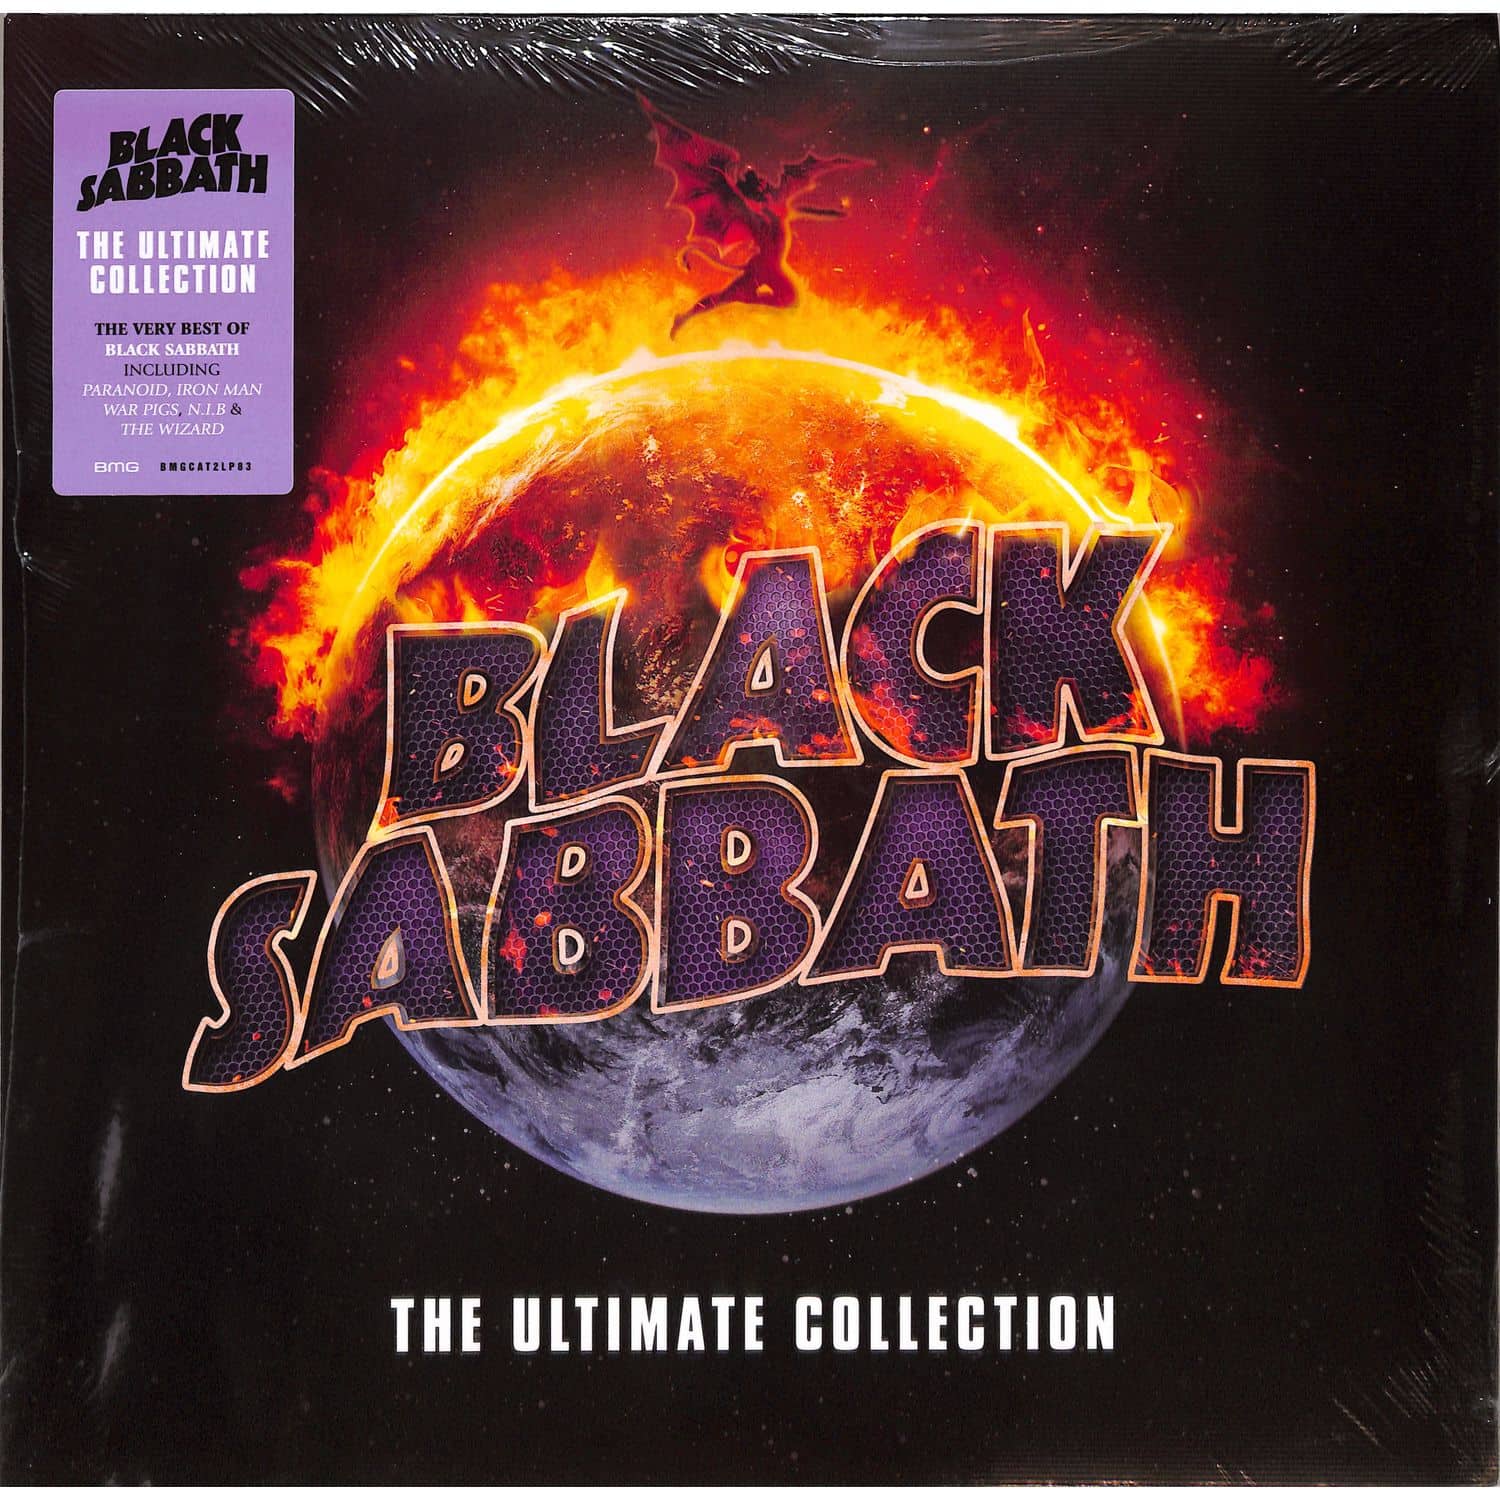 Black Sabbath - THE ULTIMATE COLLECTION 